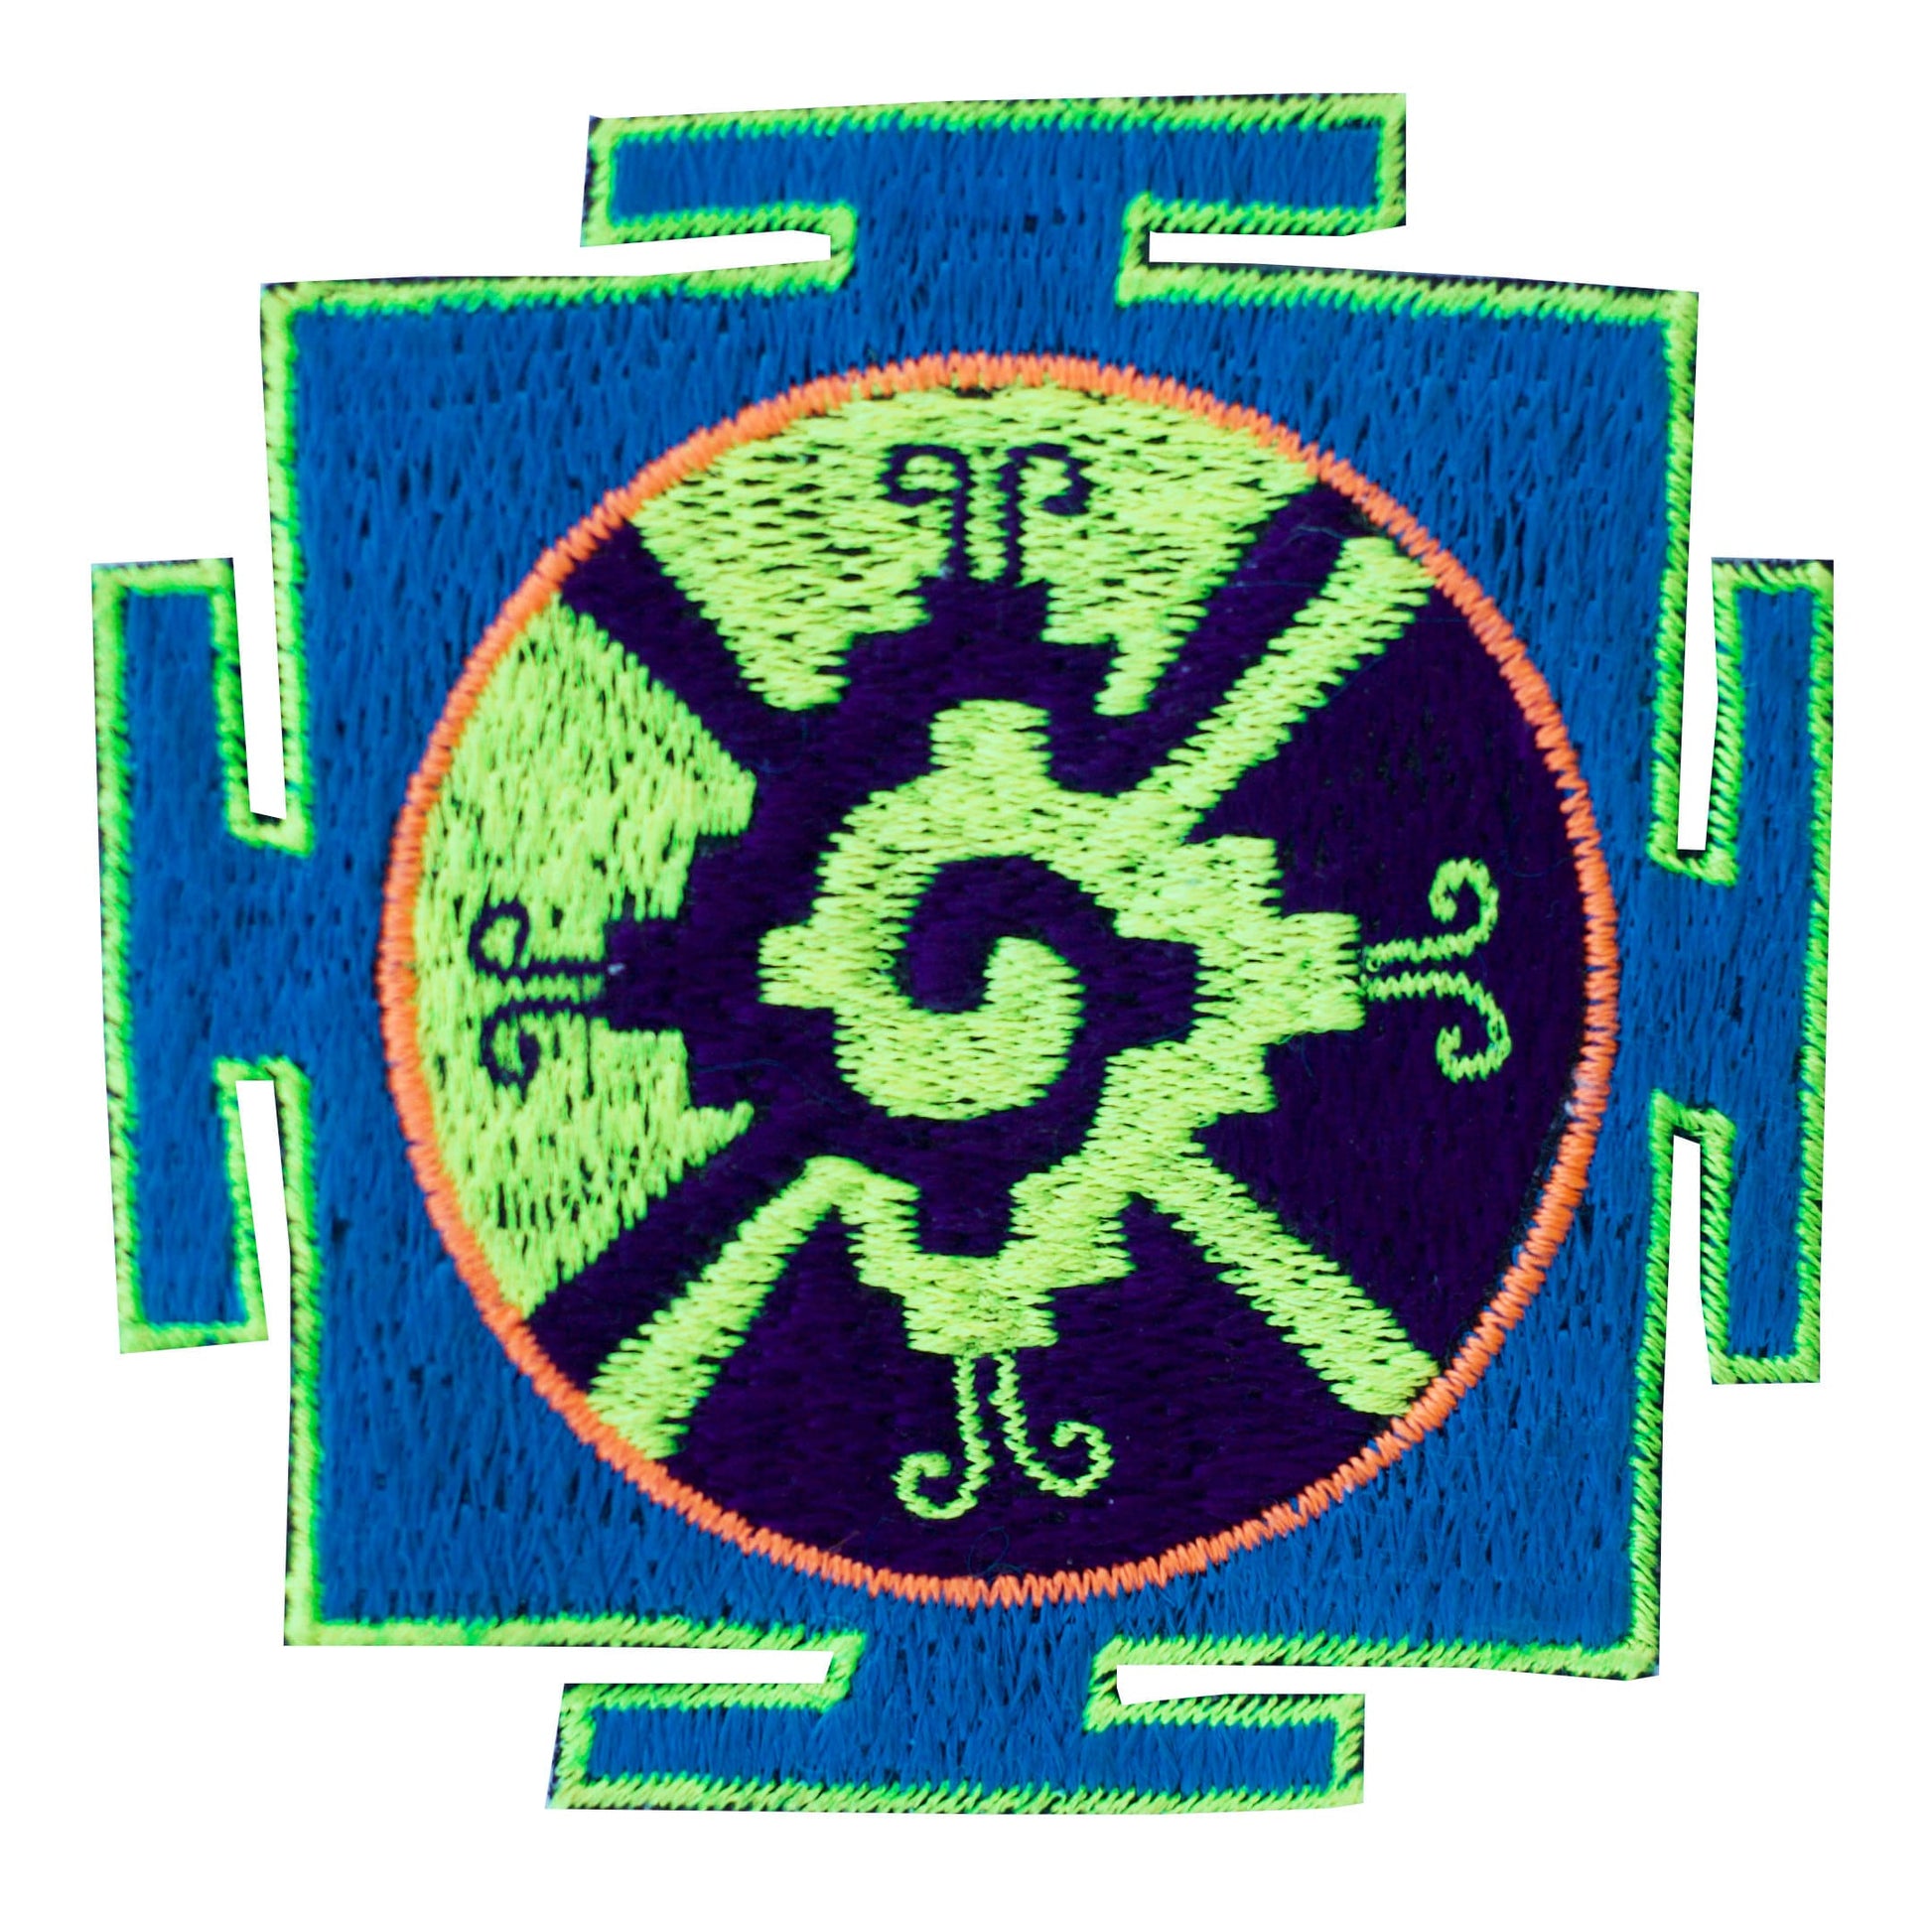 Blue Hunab Ku small embroidery patch 3.3 inches for sew on - blacklight glowing Maya art for the center of our galaxy